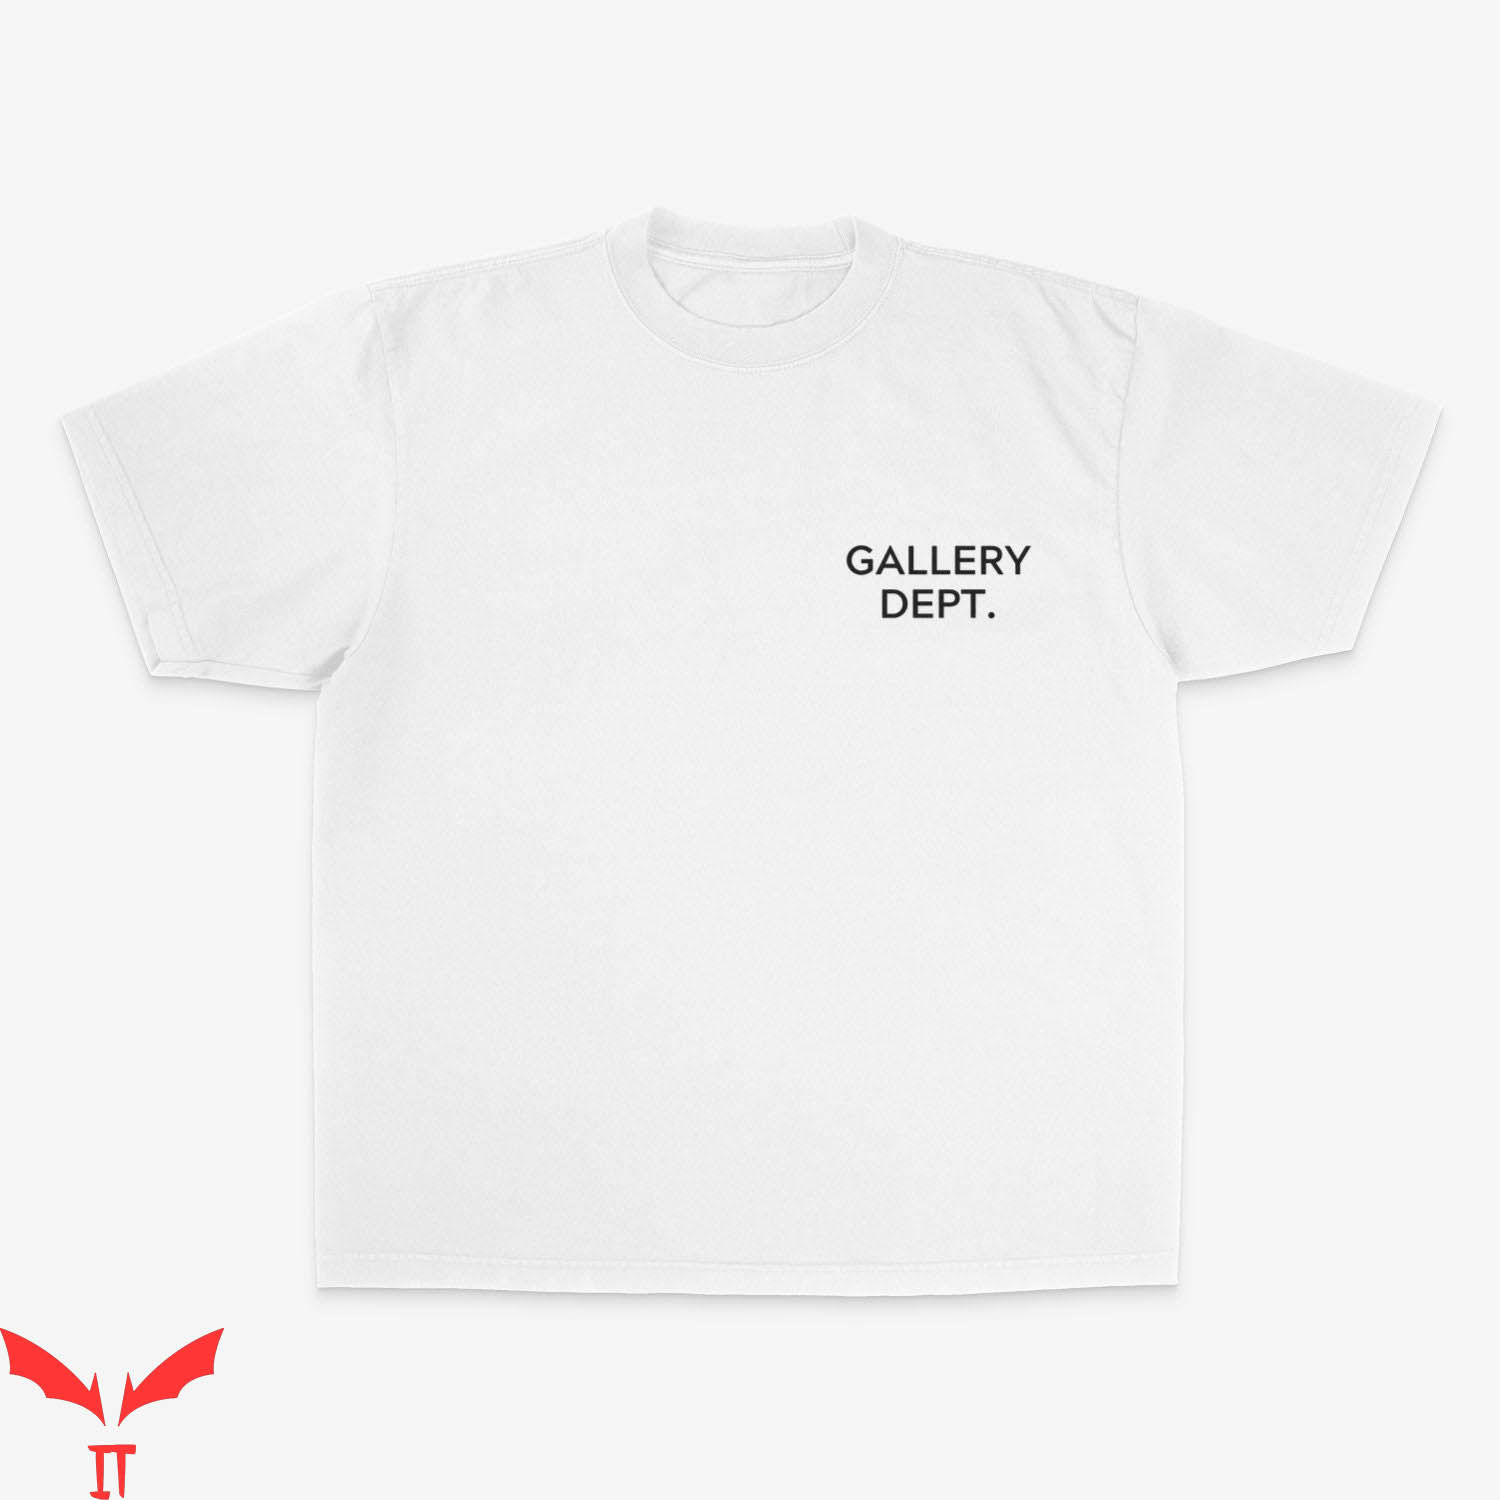 Black And White Gallery Dept T-Shirt Gallery Trendy Tee